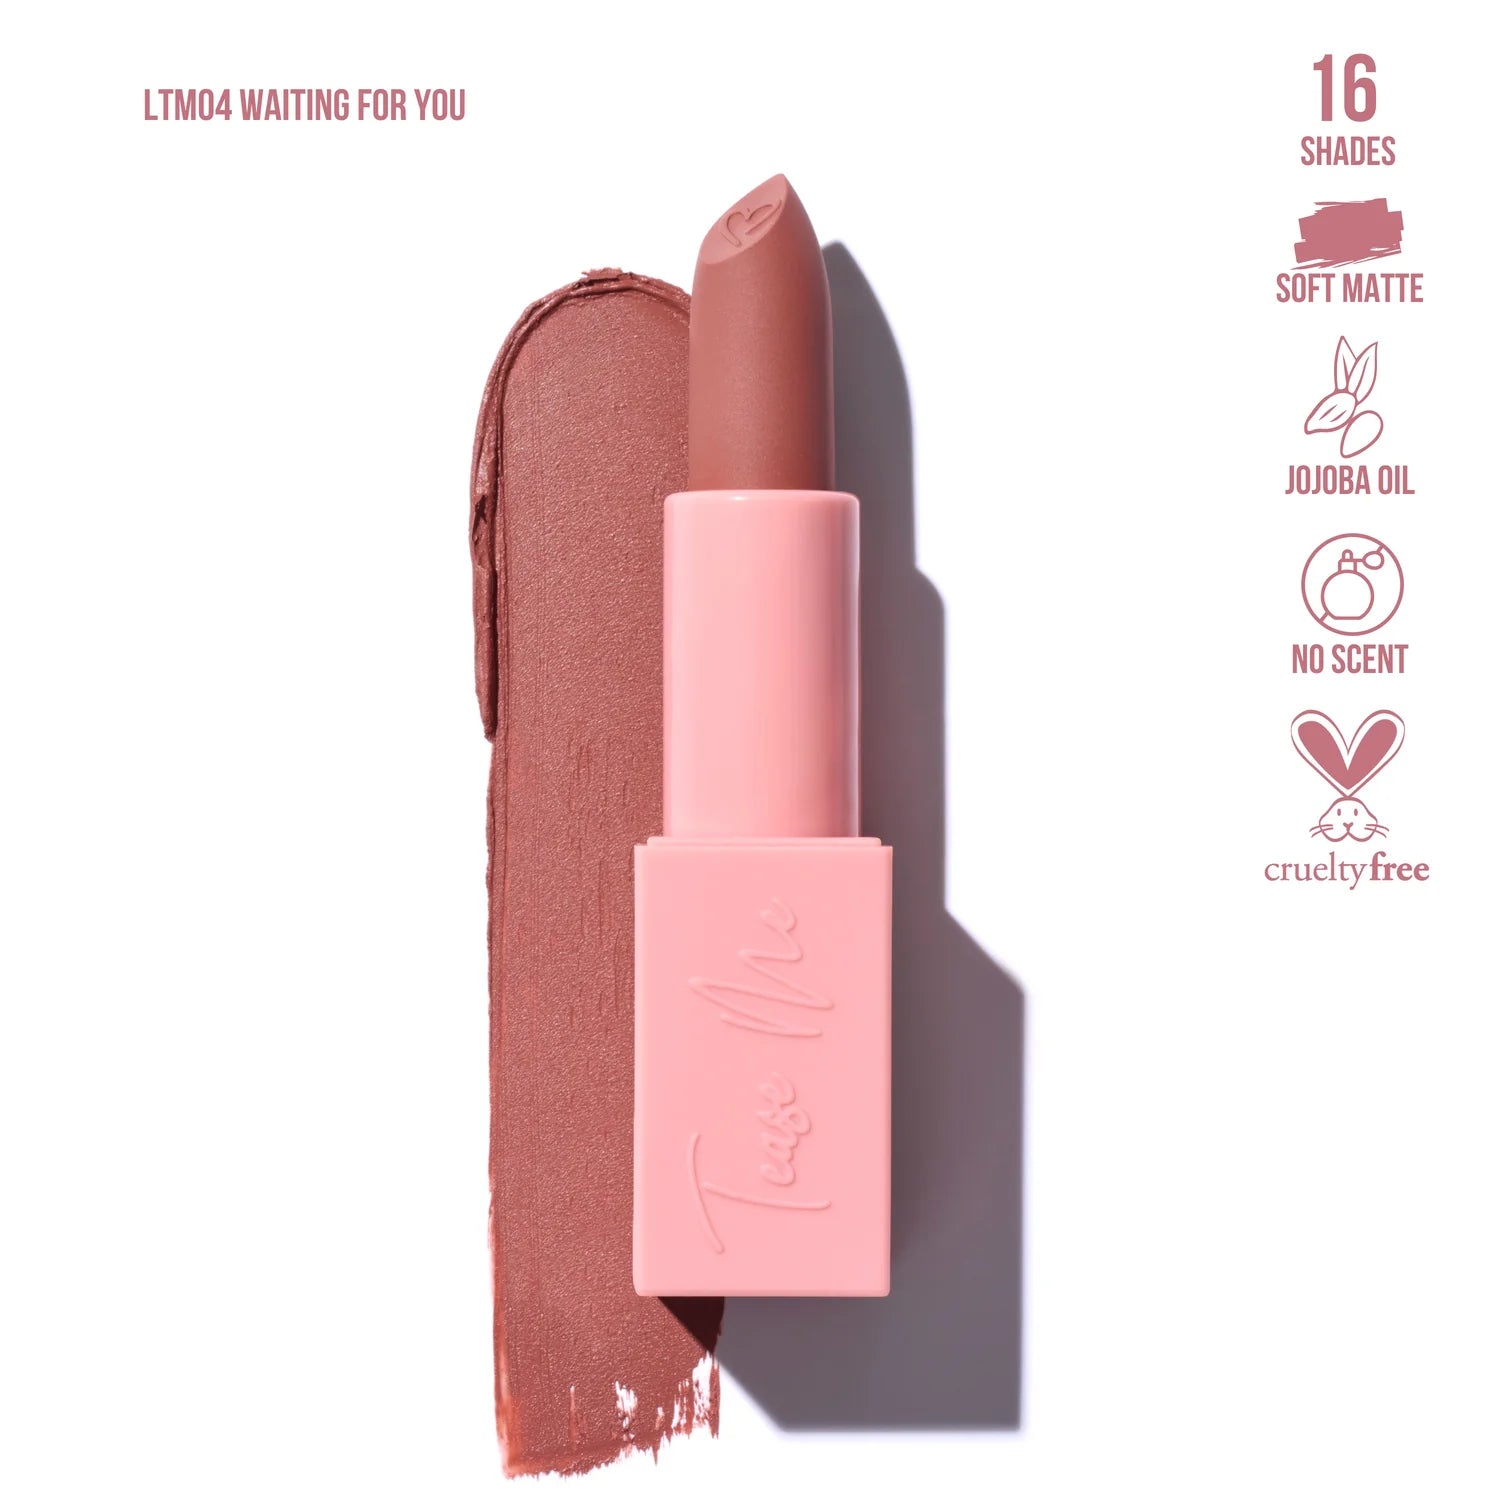 Beauty Creations - Tease Me Collection Lipstick - Waiting For You